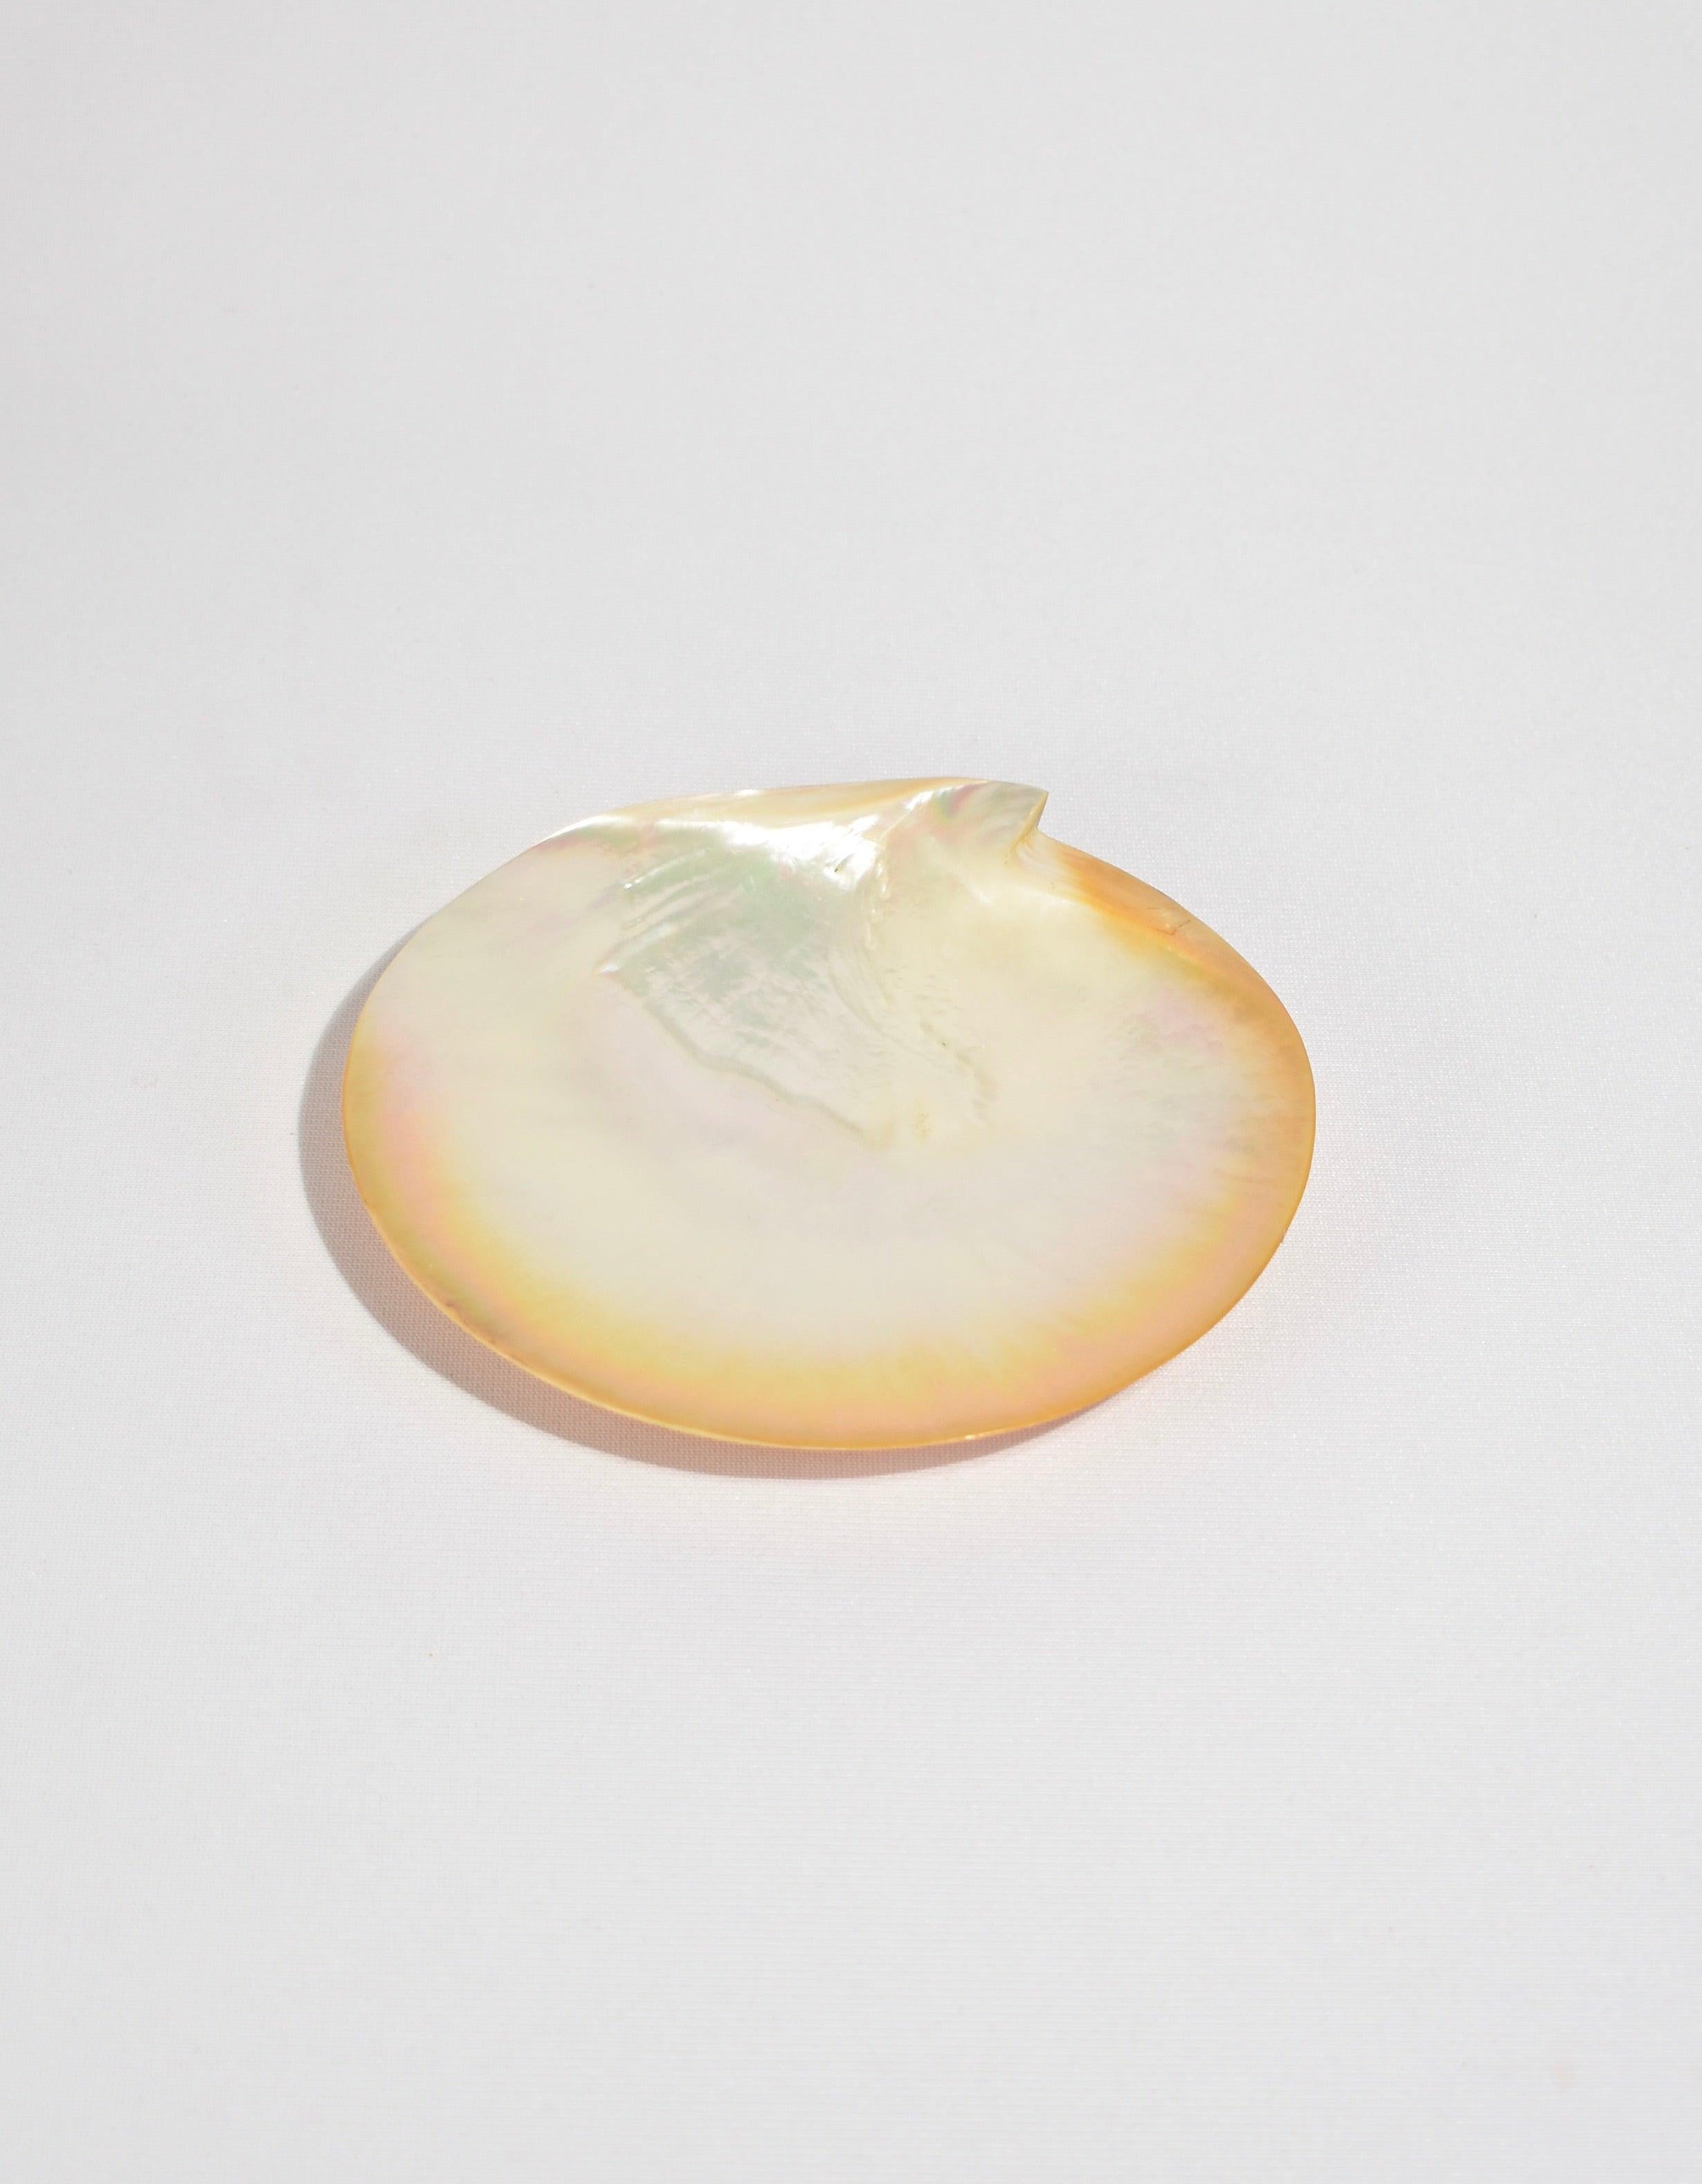 Stunning, vintage plate made of polished mother of pearl.